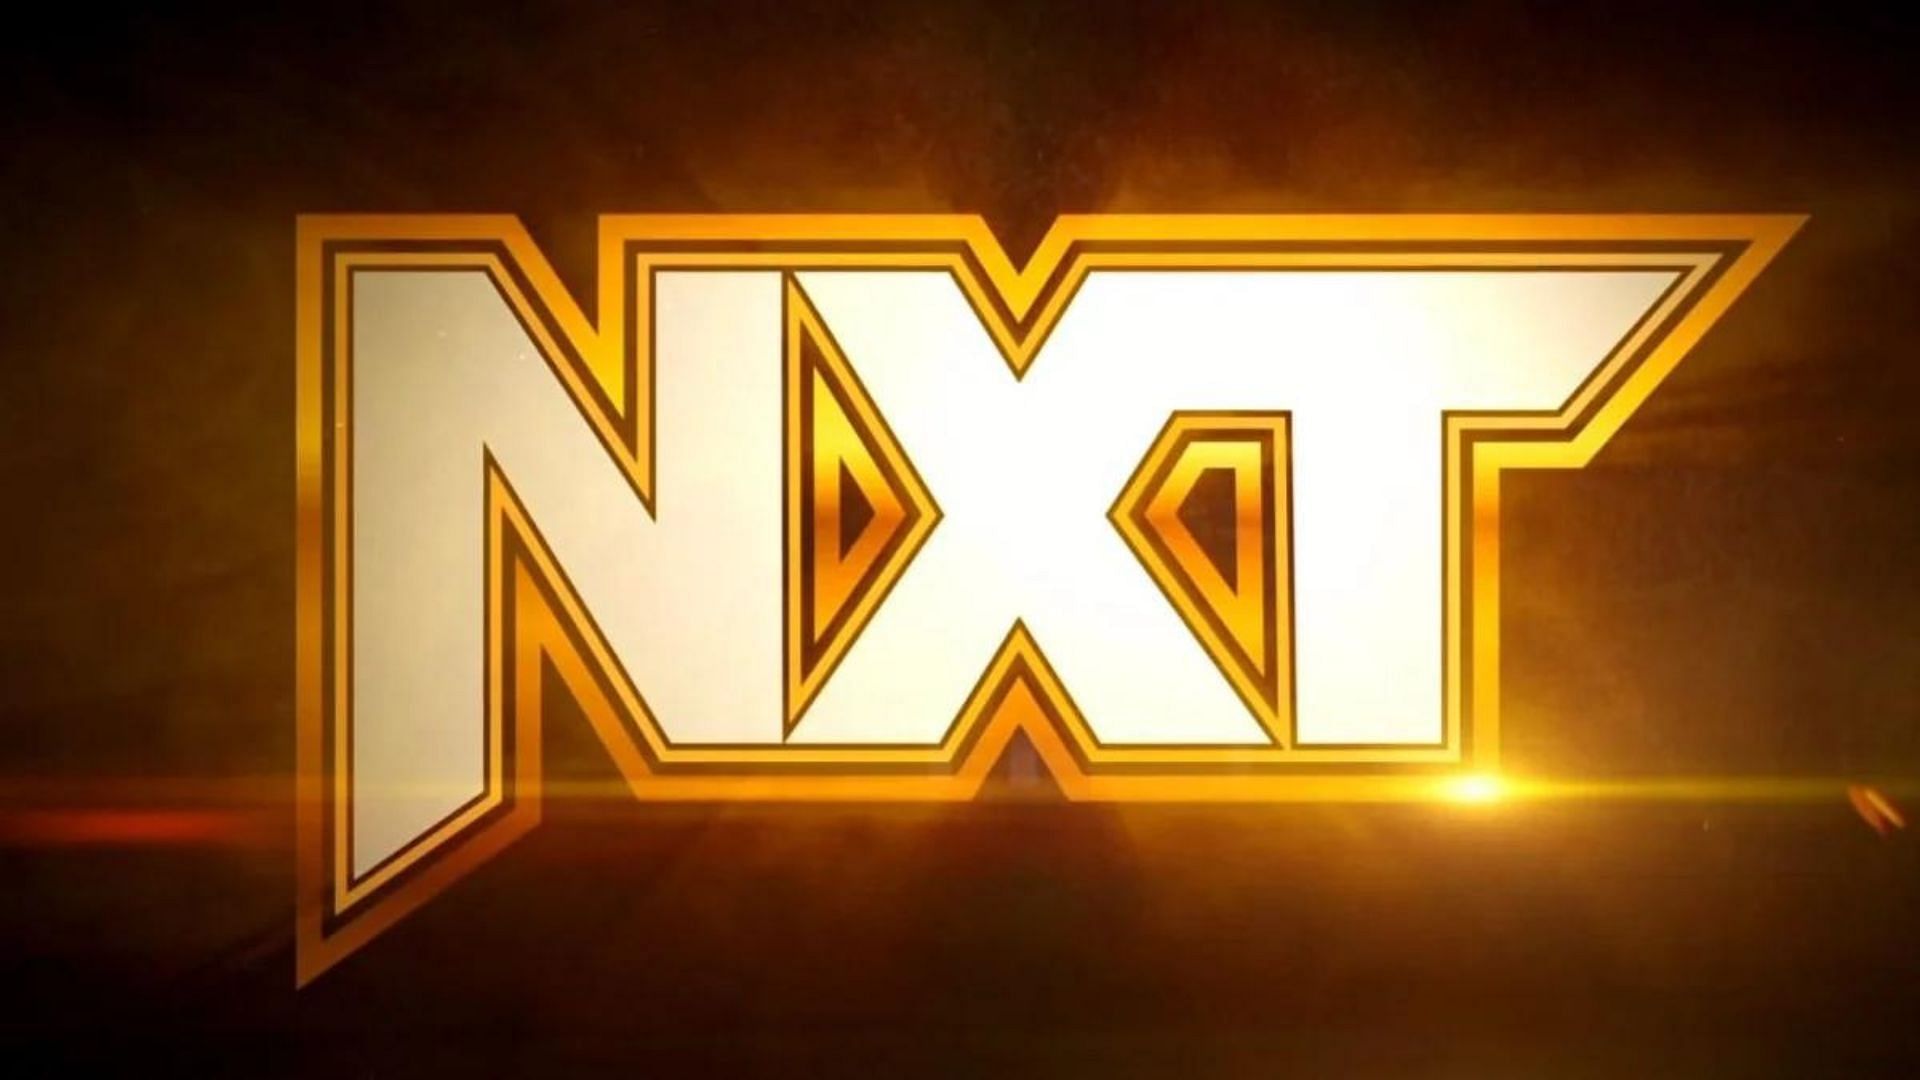 NXT saw the advent of a new era